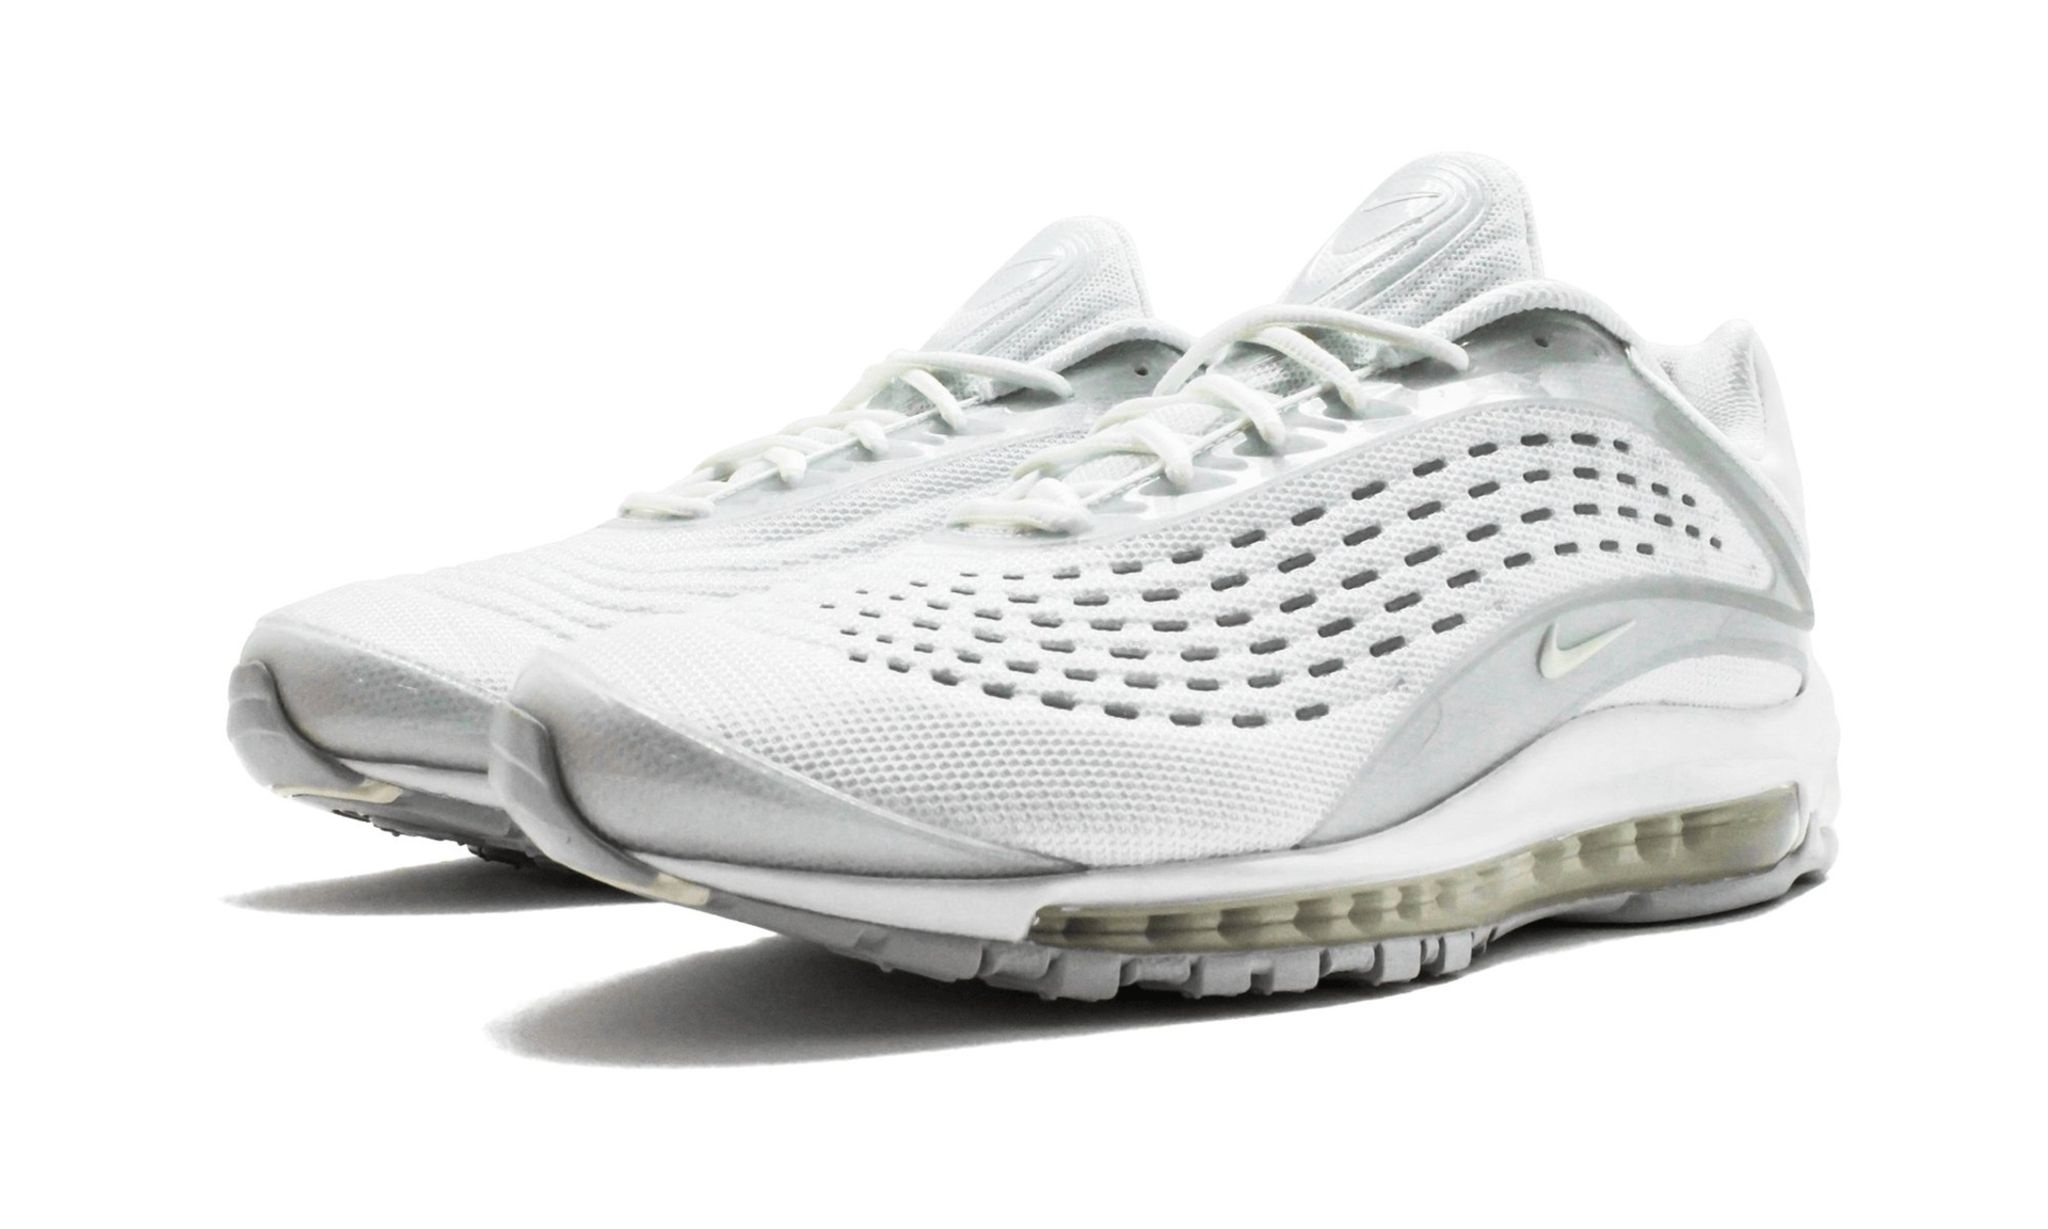 Air Max Deluxe "Triple White" - 2